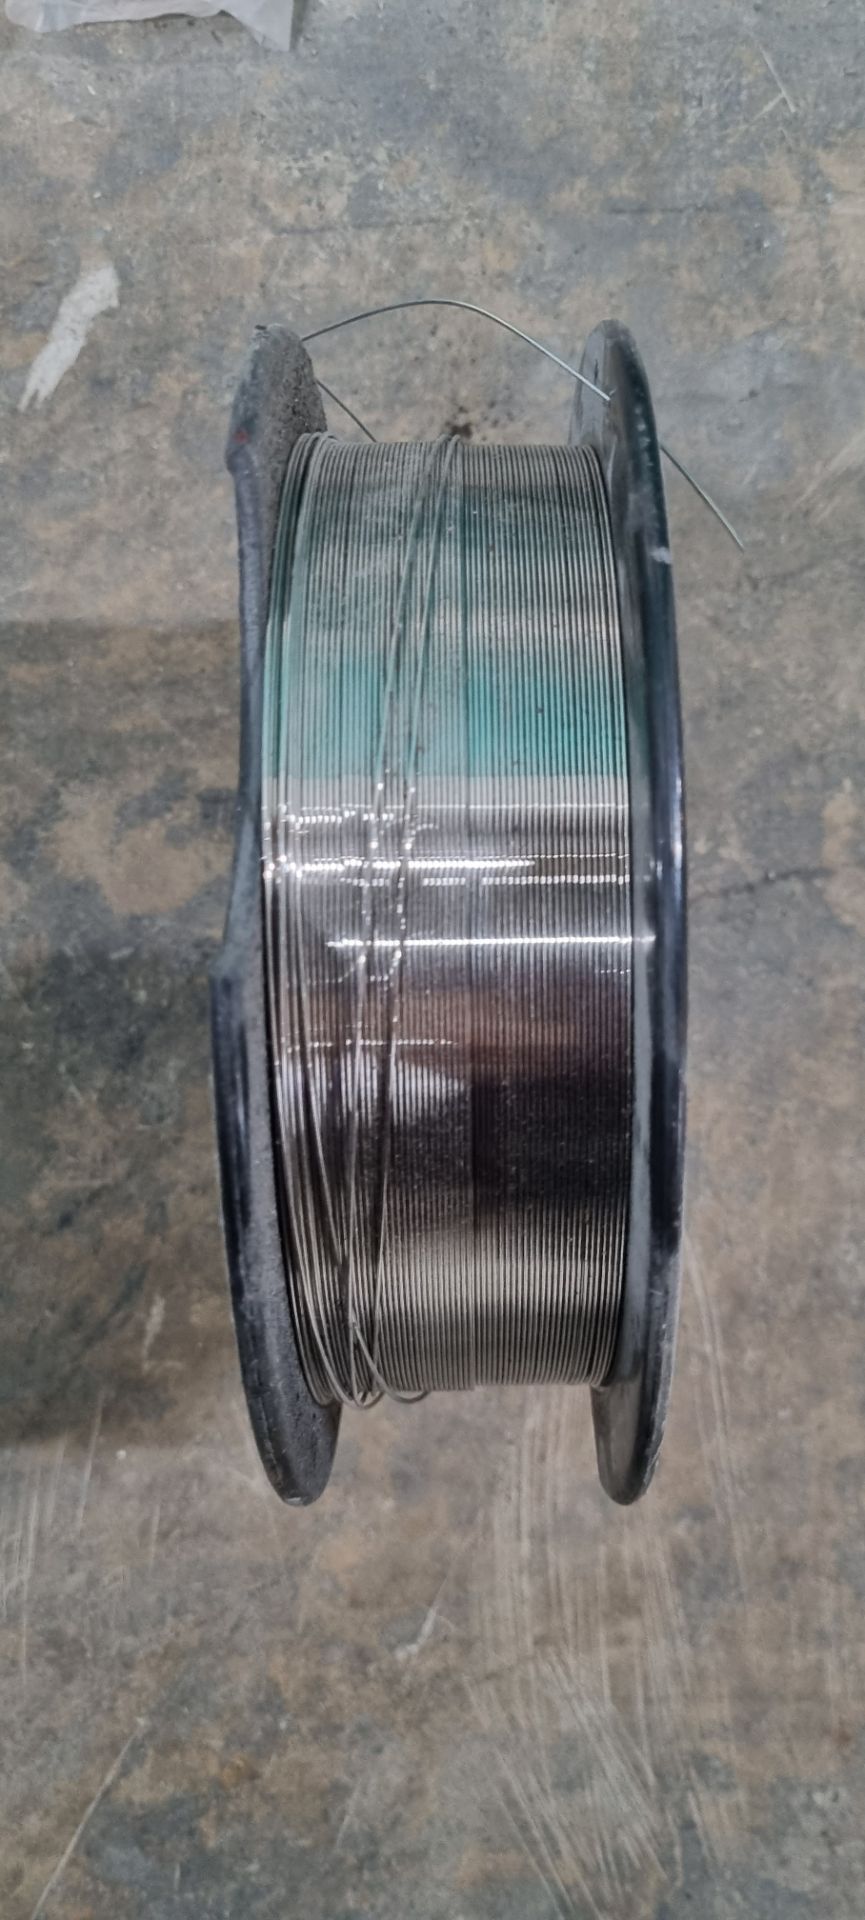 Assorted Tig/Mig Welding Wire, Stainless Steel/Aluminium - Image 5 of 7